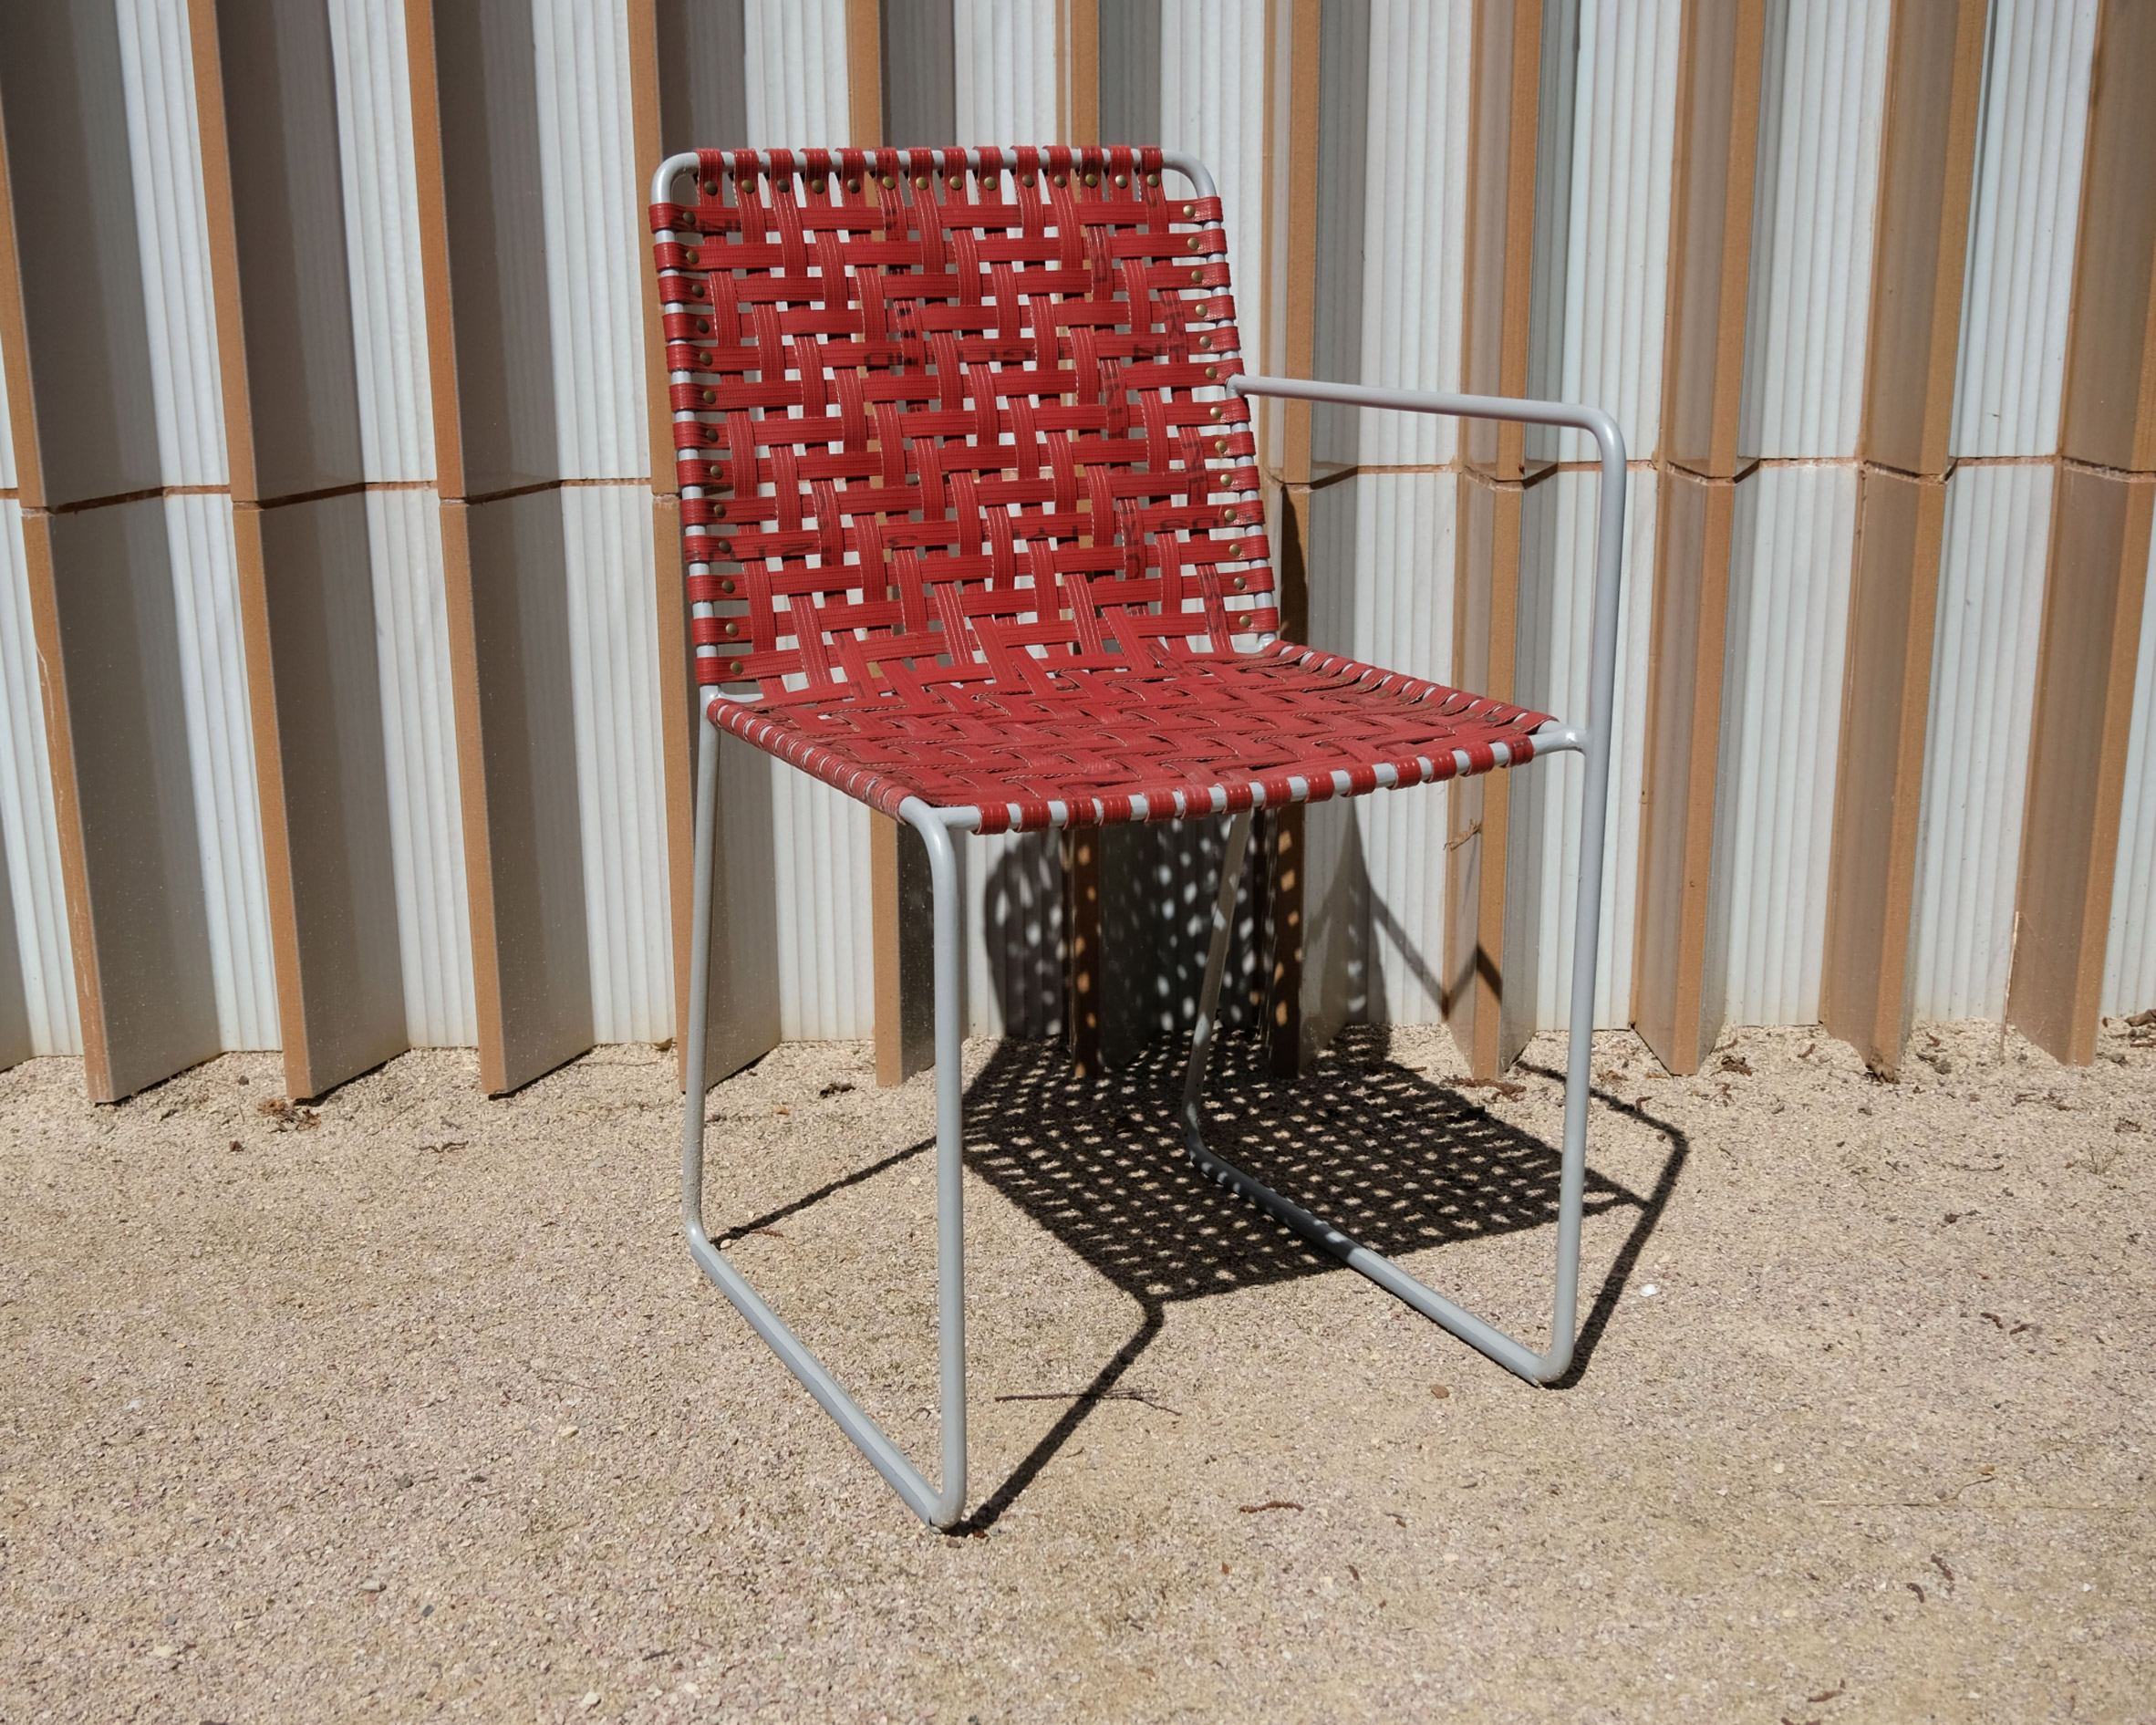 Steel-frame chair upholstered with red firehose designed by Local Works Studio for Maggie's Southampton